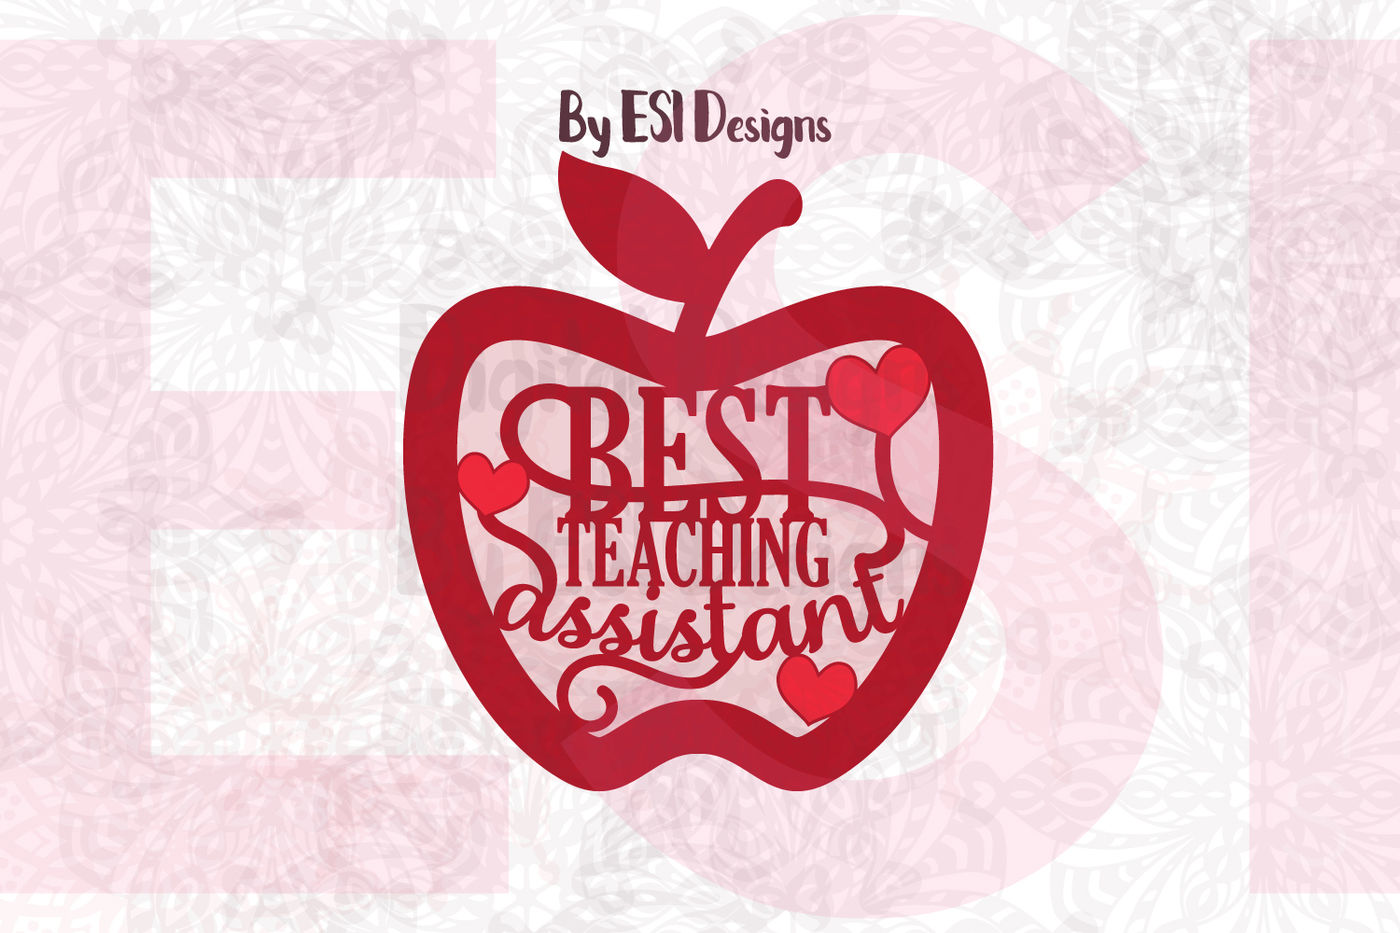 Download Best Teaching Assistant - SVG, DXF, EPS & PNG By ESI Designs | TheHungryJPEG.com